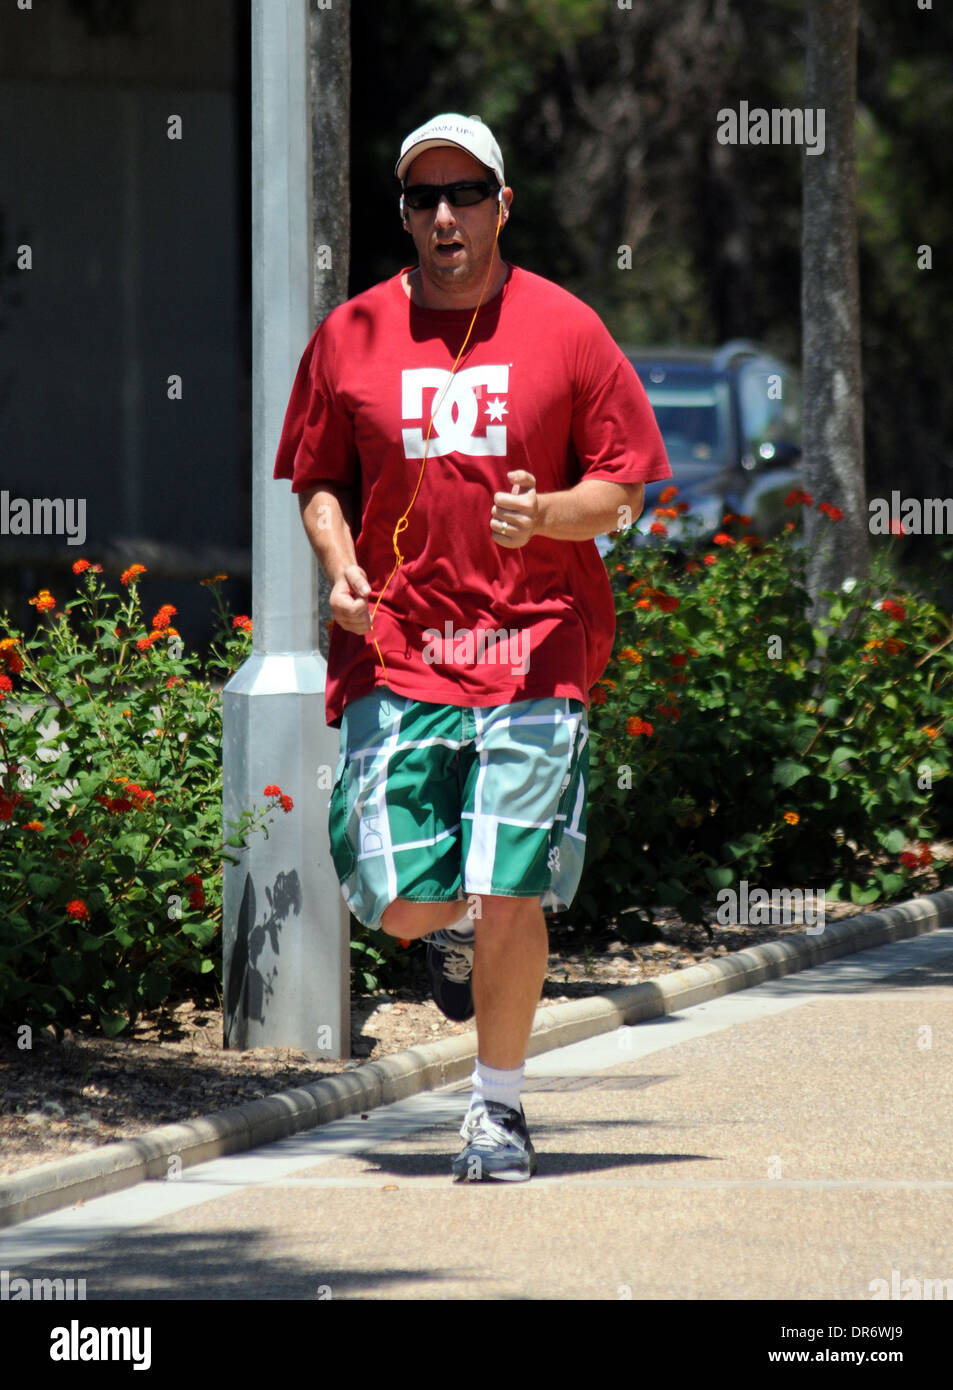 U.S. actor Adam Sandler playing sports on the island of Mallorca in the summer of 2010. Stock Photo